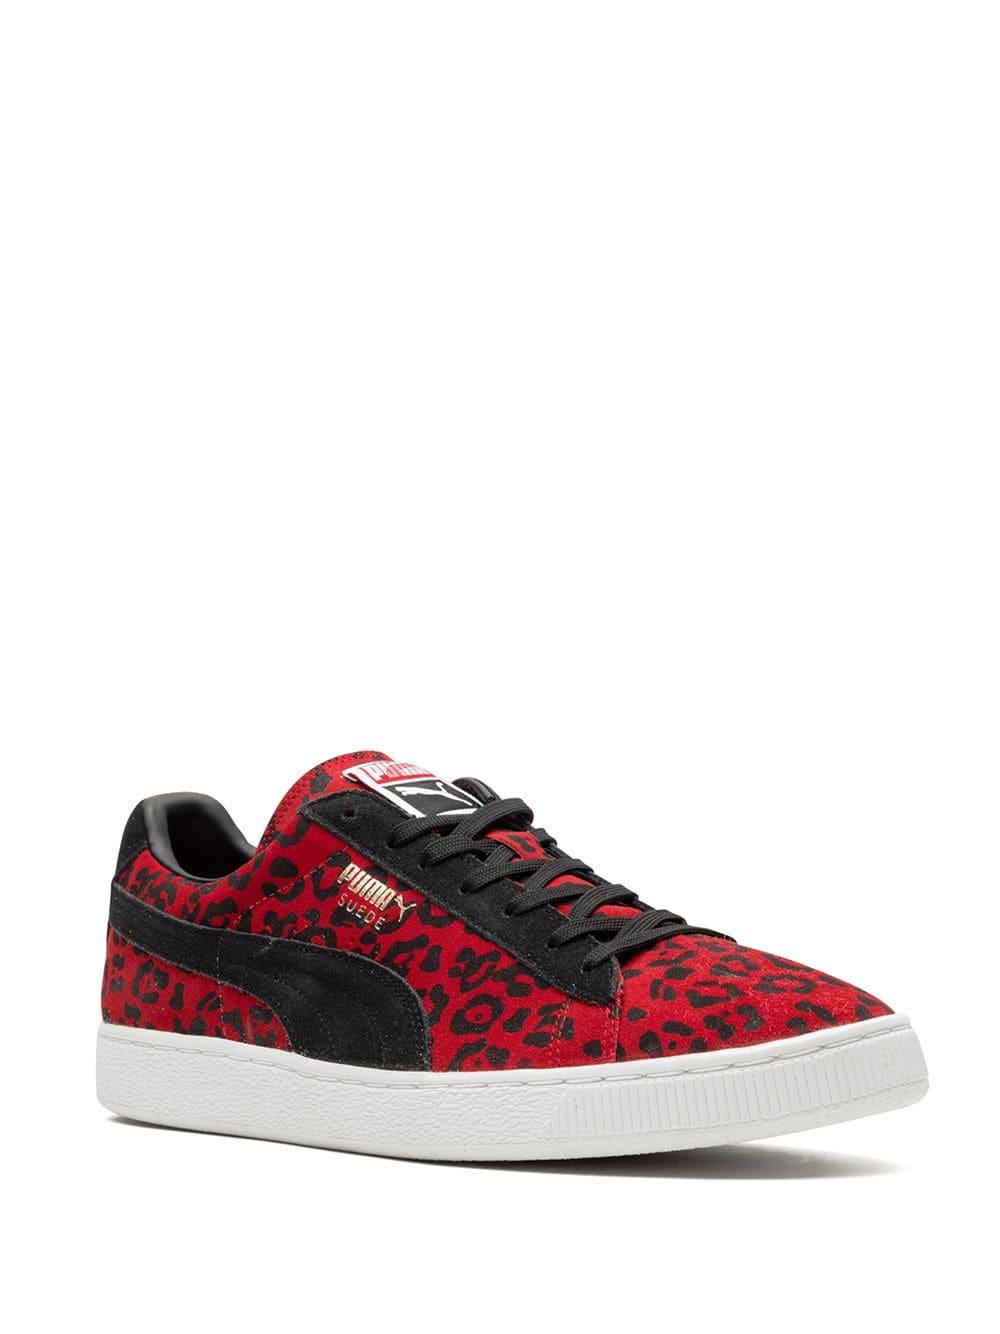 PUMA Lace Leopard Print Sneakers in Red for Men - Lyst